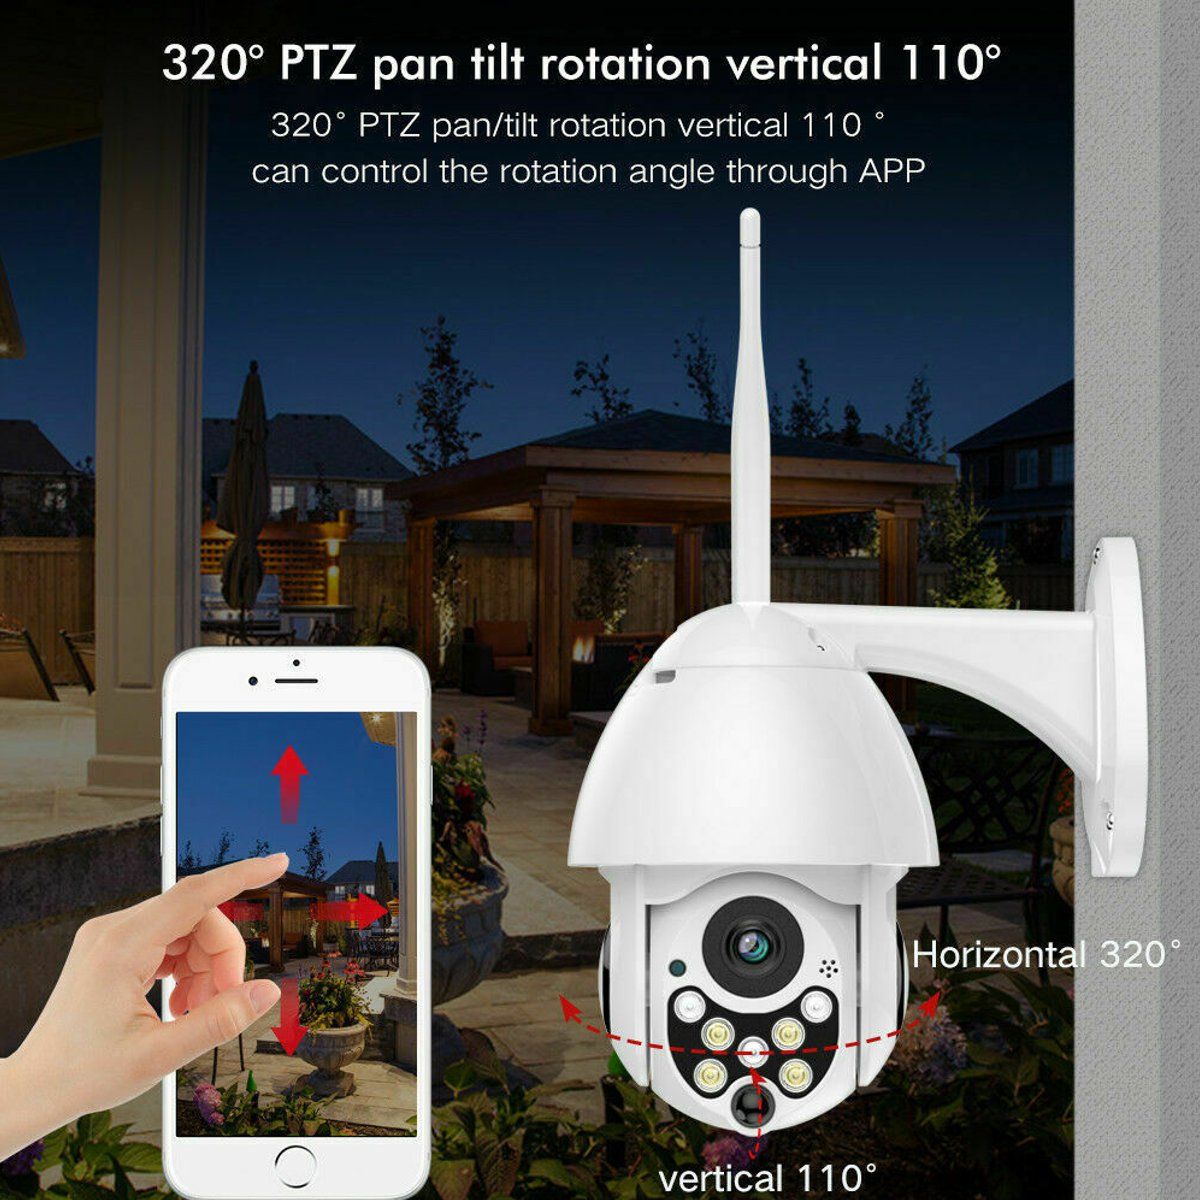 5X-Zoom-Pan-Tilt-2MP-HD-WiFi-IP-Security-Camera-7-LEDs-Infrared-Night-Vision-Outdoor-Waterproof-1546261